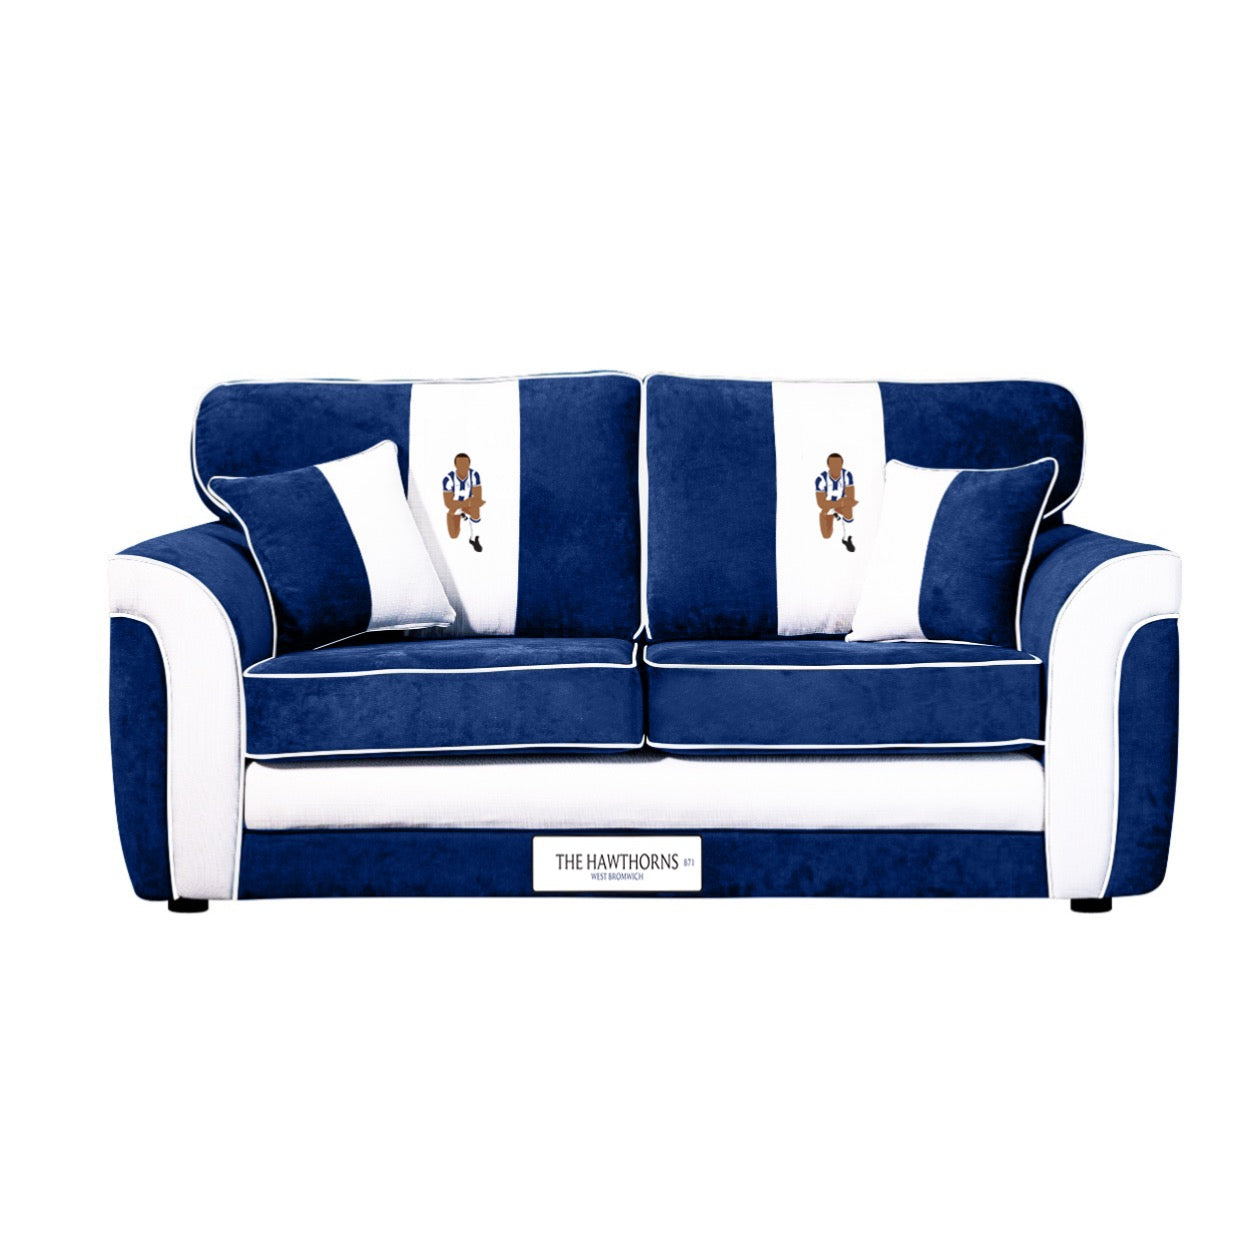 The Hawthorns 3 Seater Sofa (West Bromwich Albion FC)